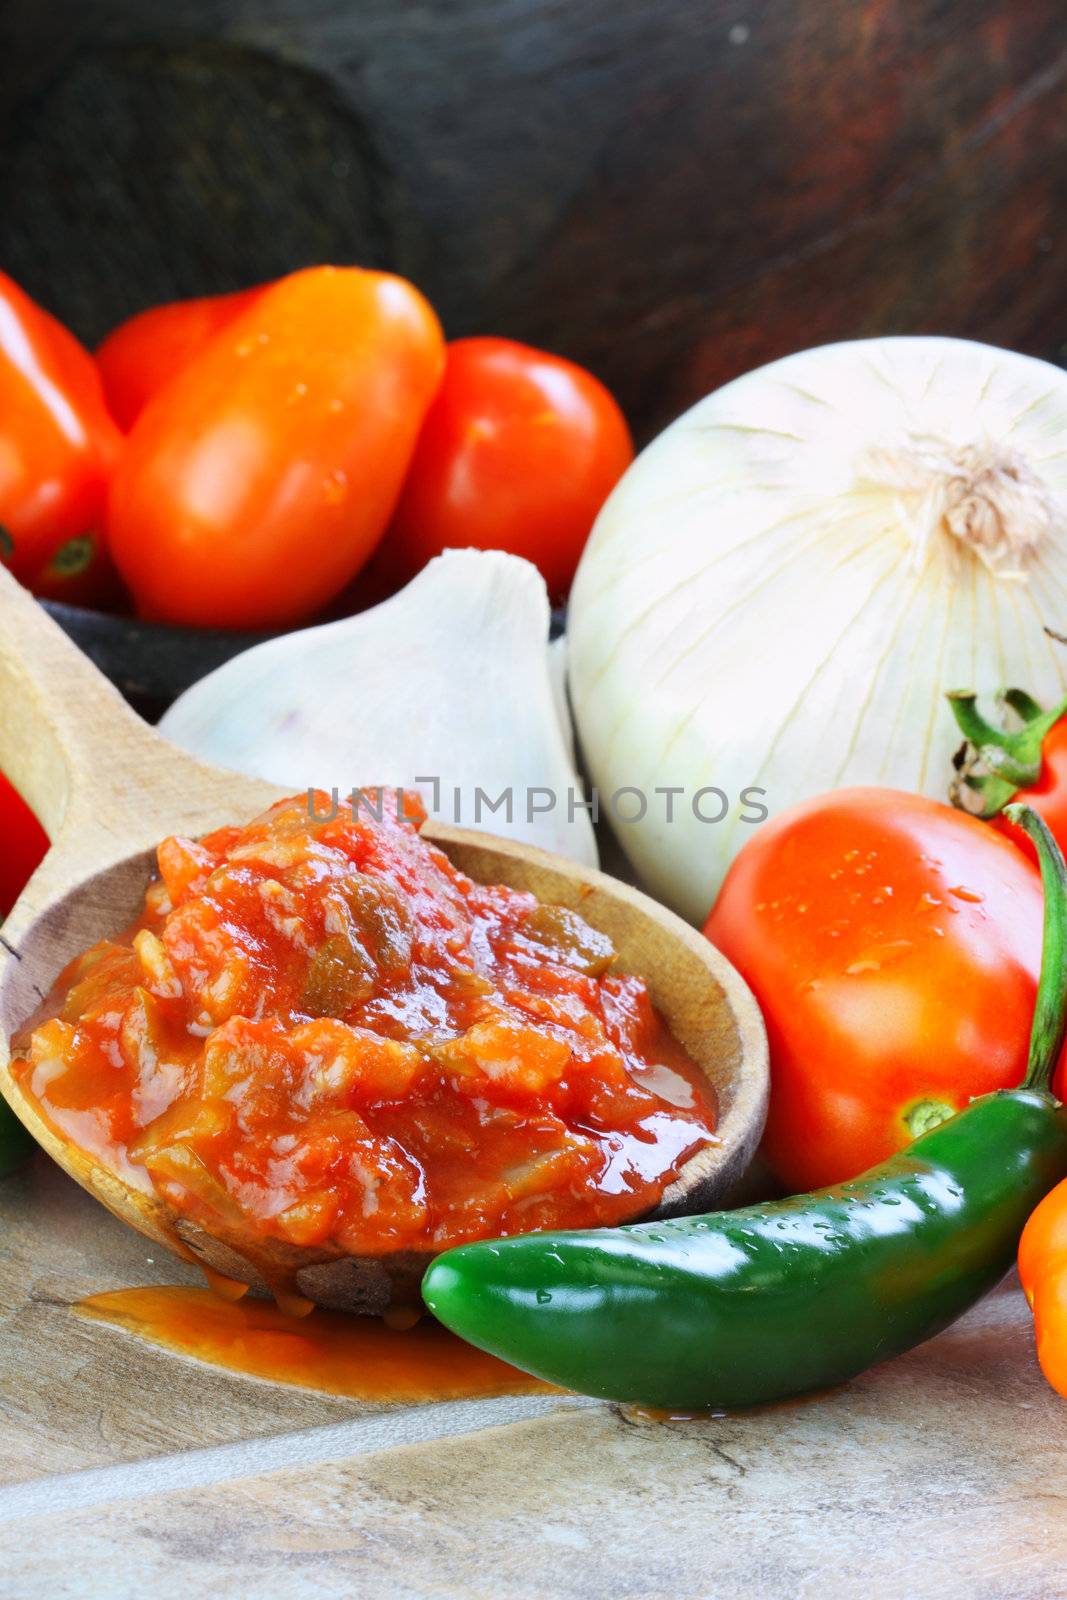 Salsa and Ingredients by StephanieFrey